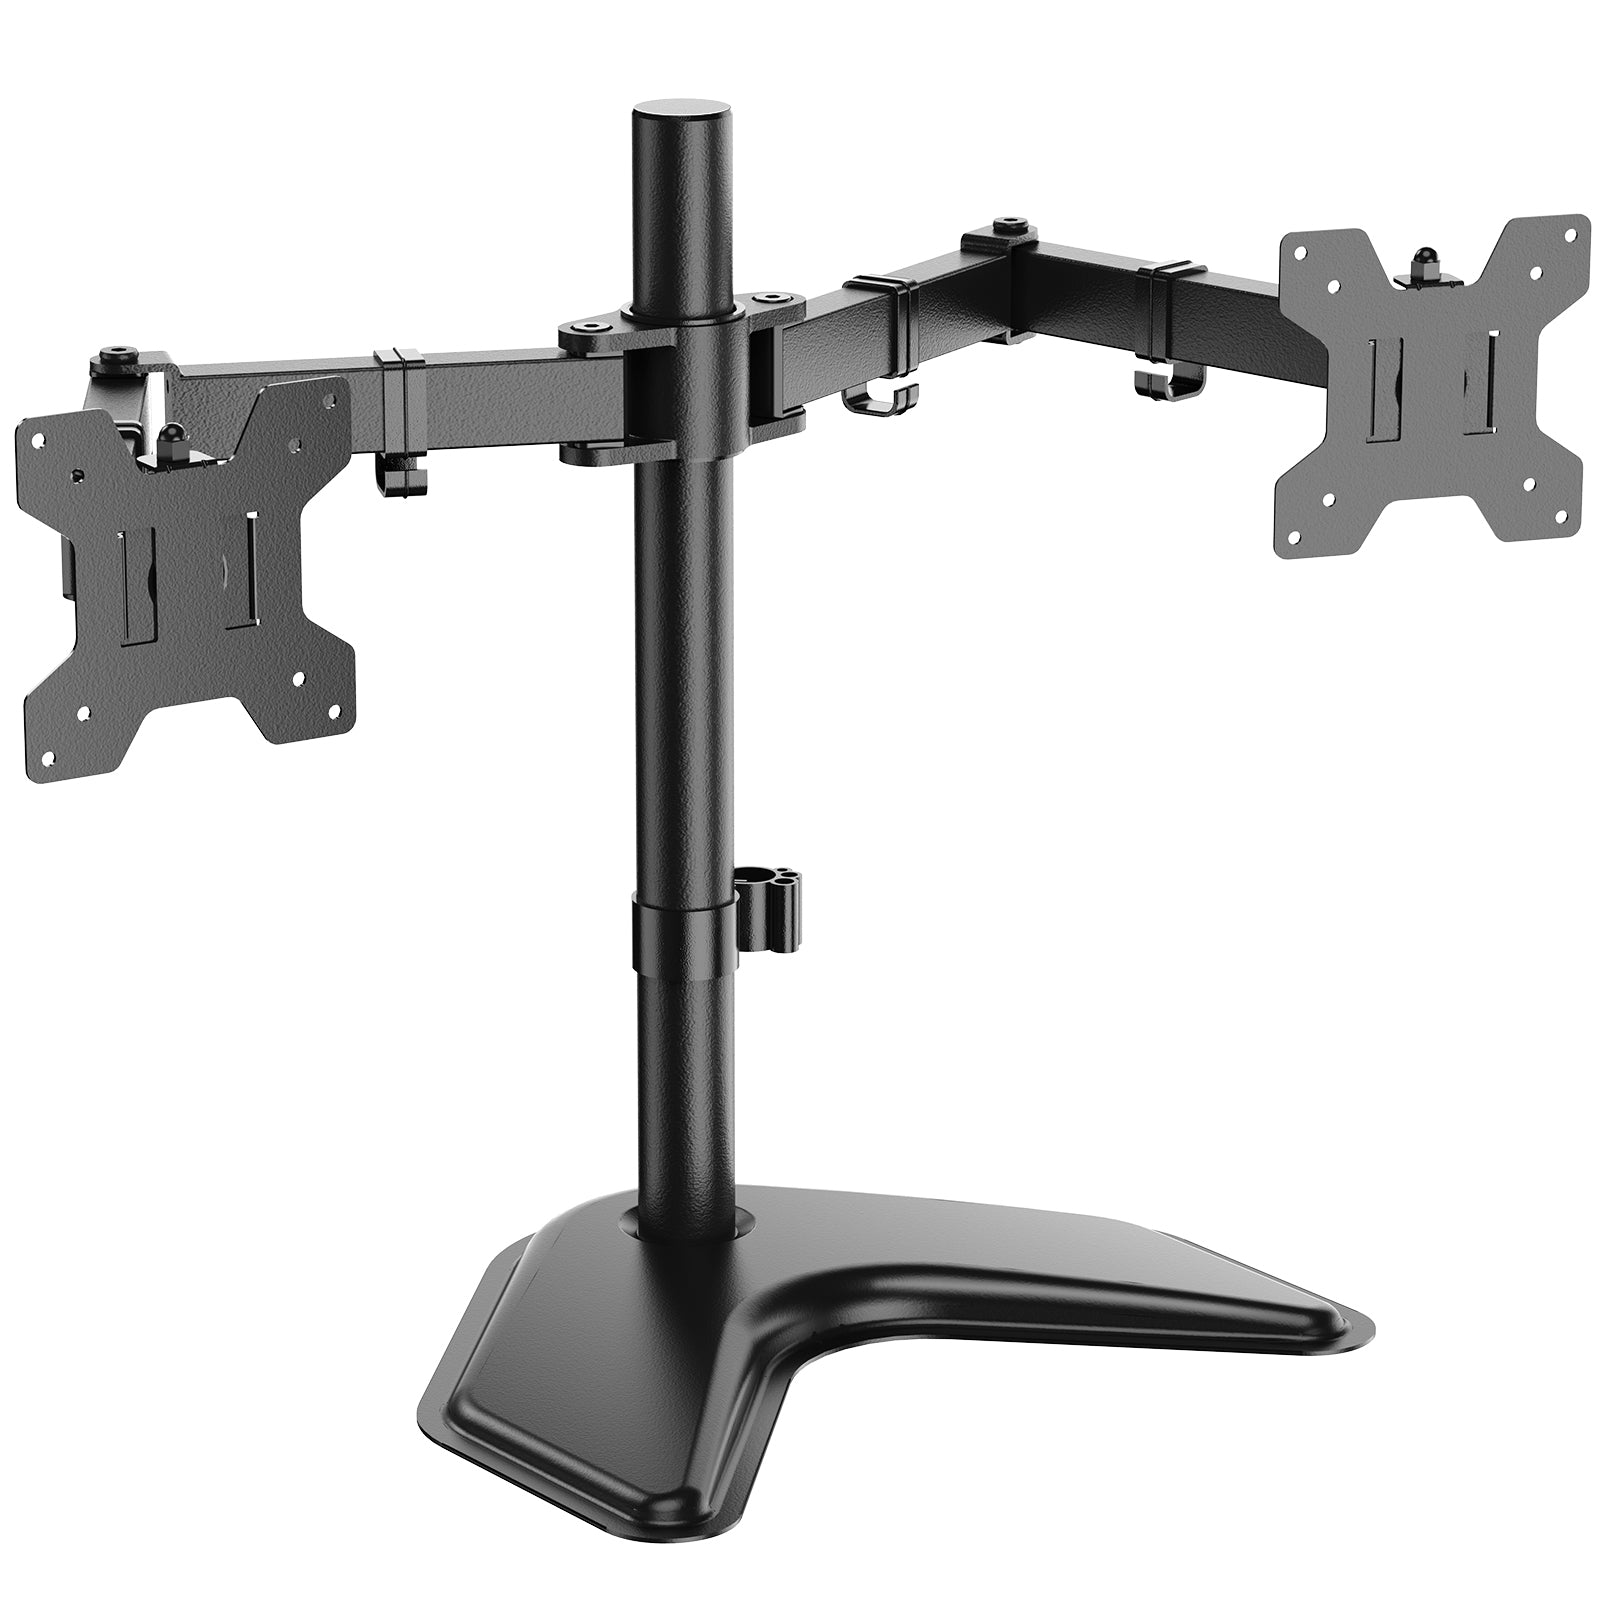 Dual Free-Standing LCD Monitor Stand Fits Screens up to 27 /22 lbs - WALI  ELECTRIC